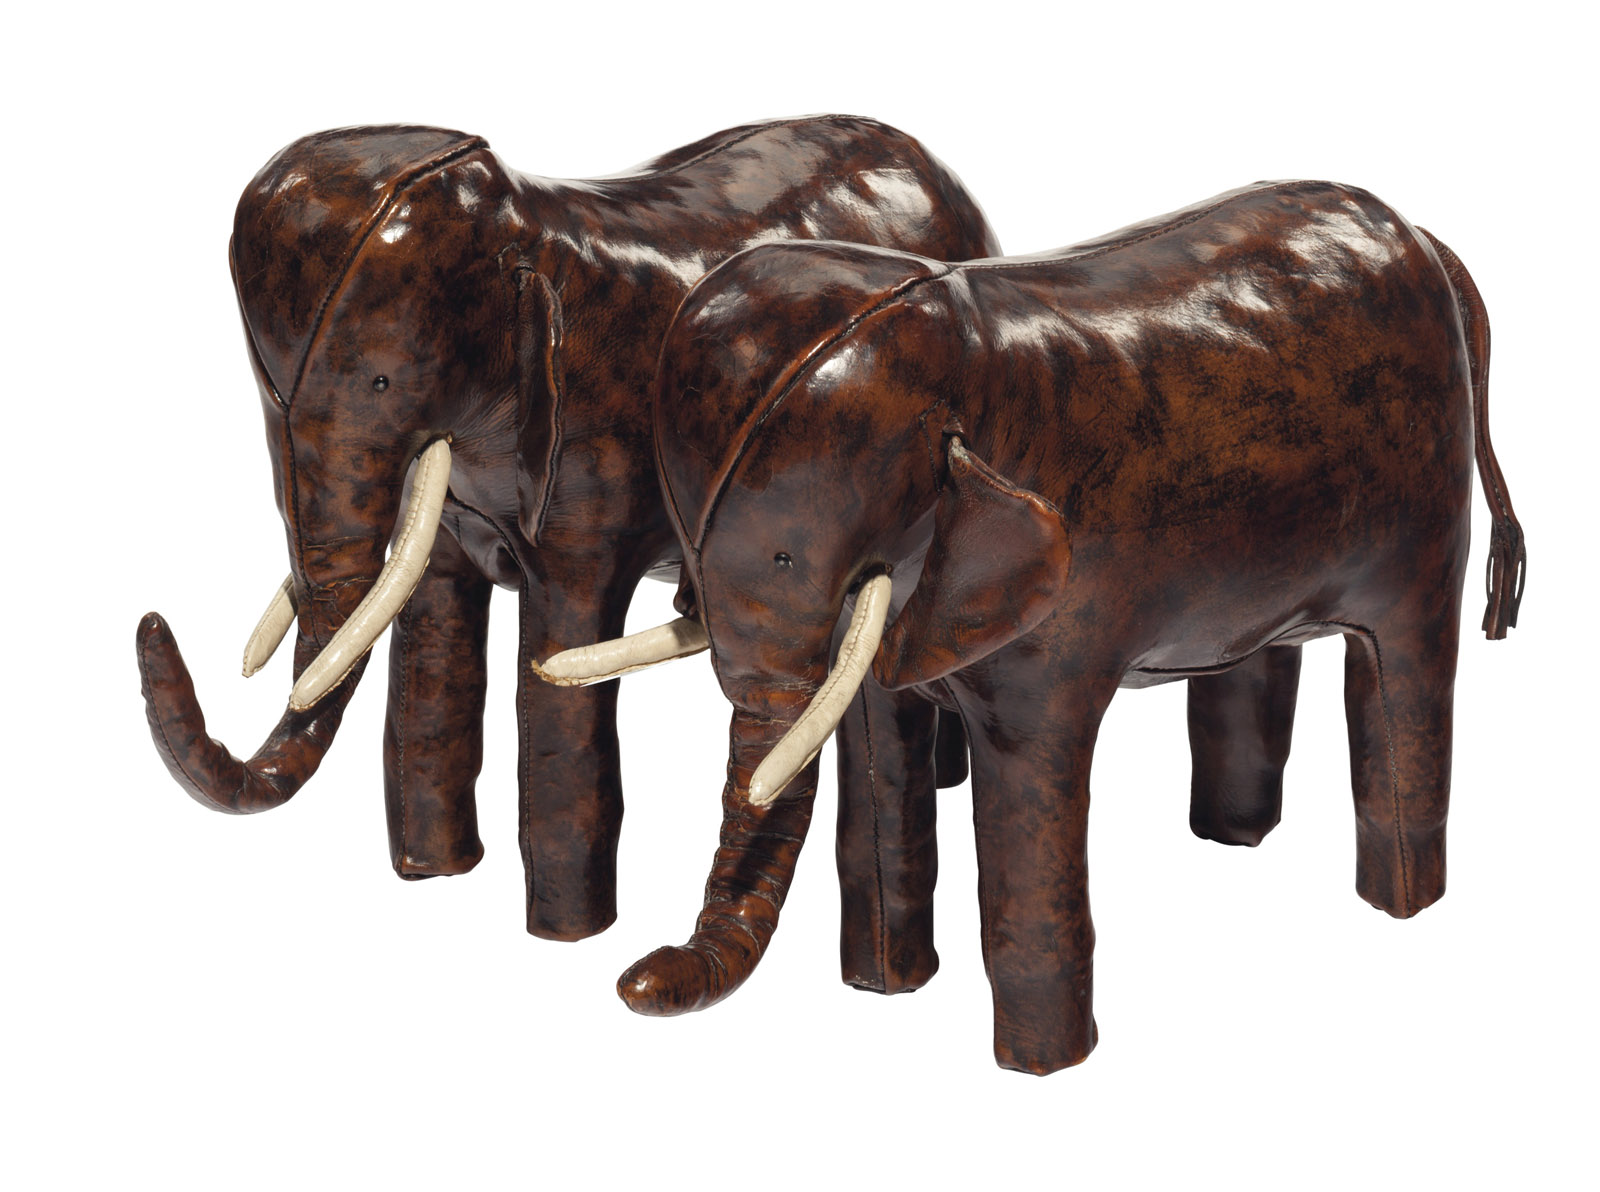 This undated photo provided by Christie's shows a pair of English cowhide leather elephant-shaped ottomans. The ottomans, which will be sold by Christie's New York during a two-day auction of the contents of Ronald and Nancy Reagan's ranch-style home in California, have a pre-sale estimate of $2,000-$3,000. Christieâ€™s announced Thursday, June 30, 2016, highlights of the Sept. 21-22 sale in New York City. (Christie's via AP) MANDATORY CREDIT